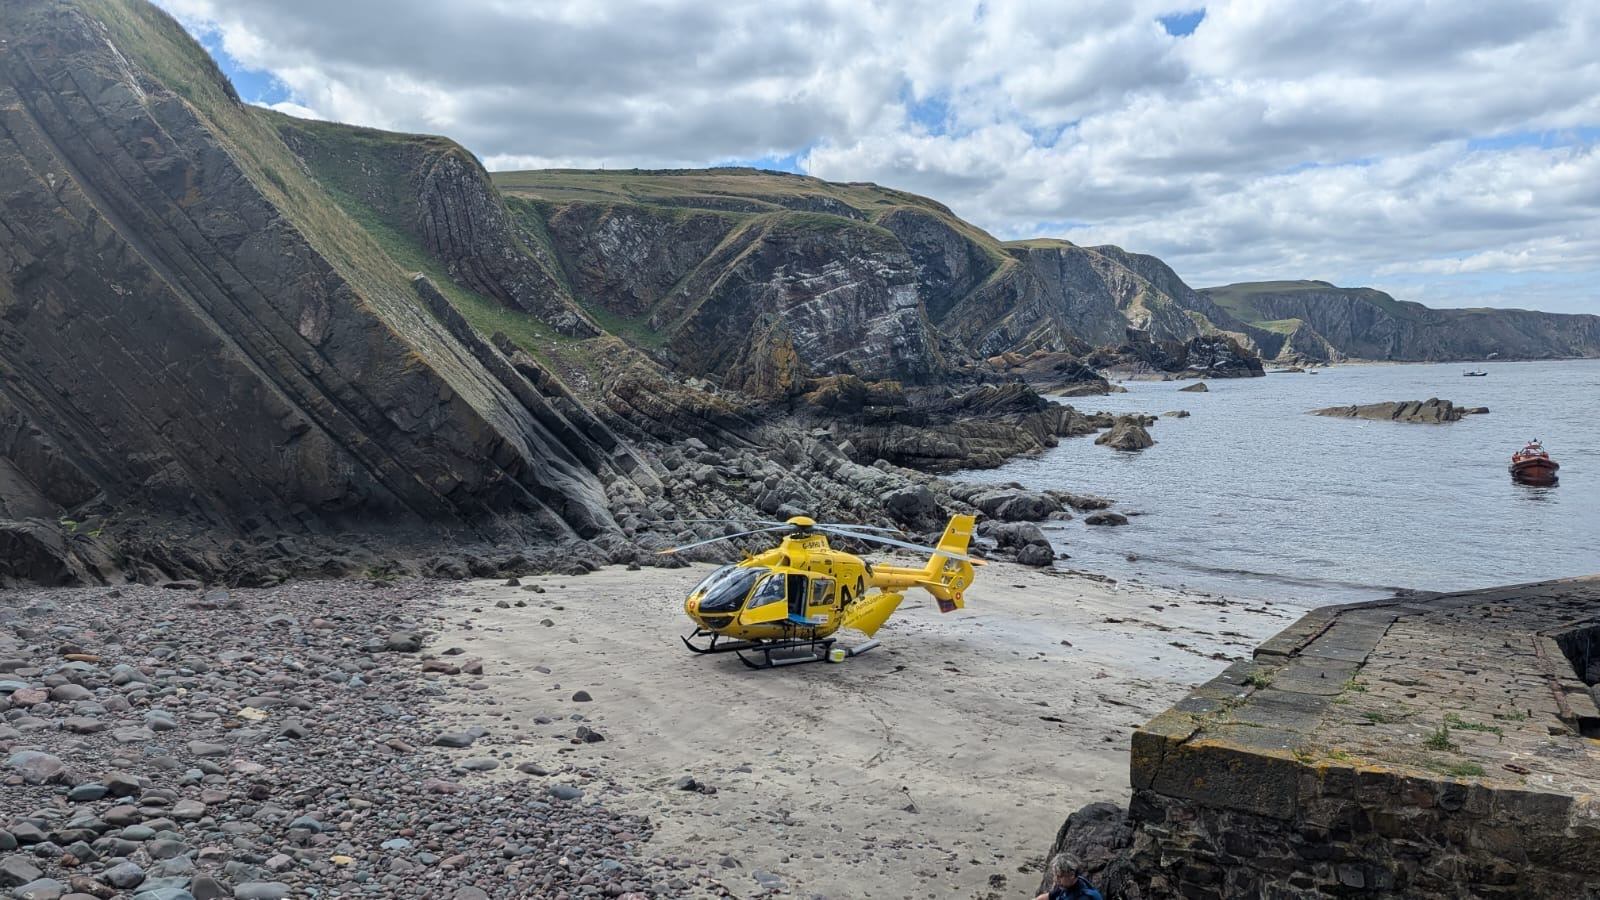 Scotland’s Charity Air Ambulance (SCAA) landed at Broadhaven Bay near the injured woman at the weekend.